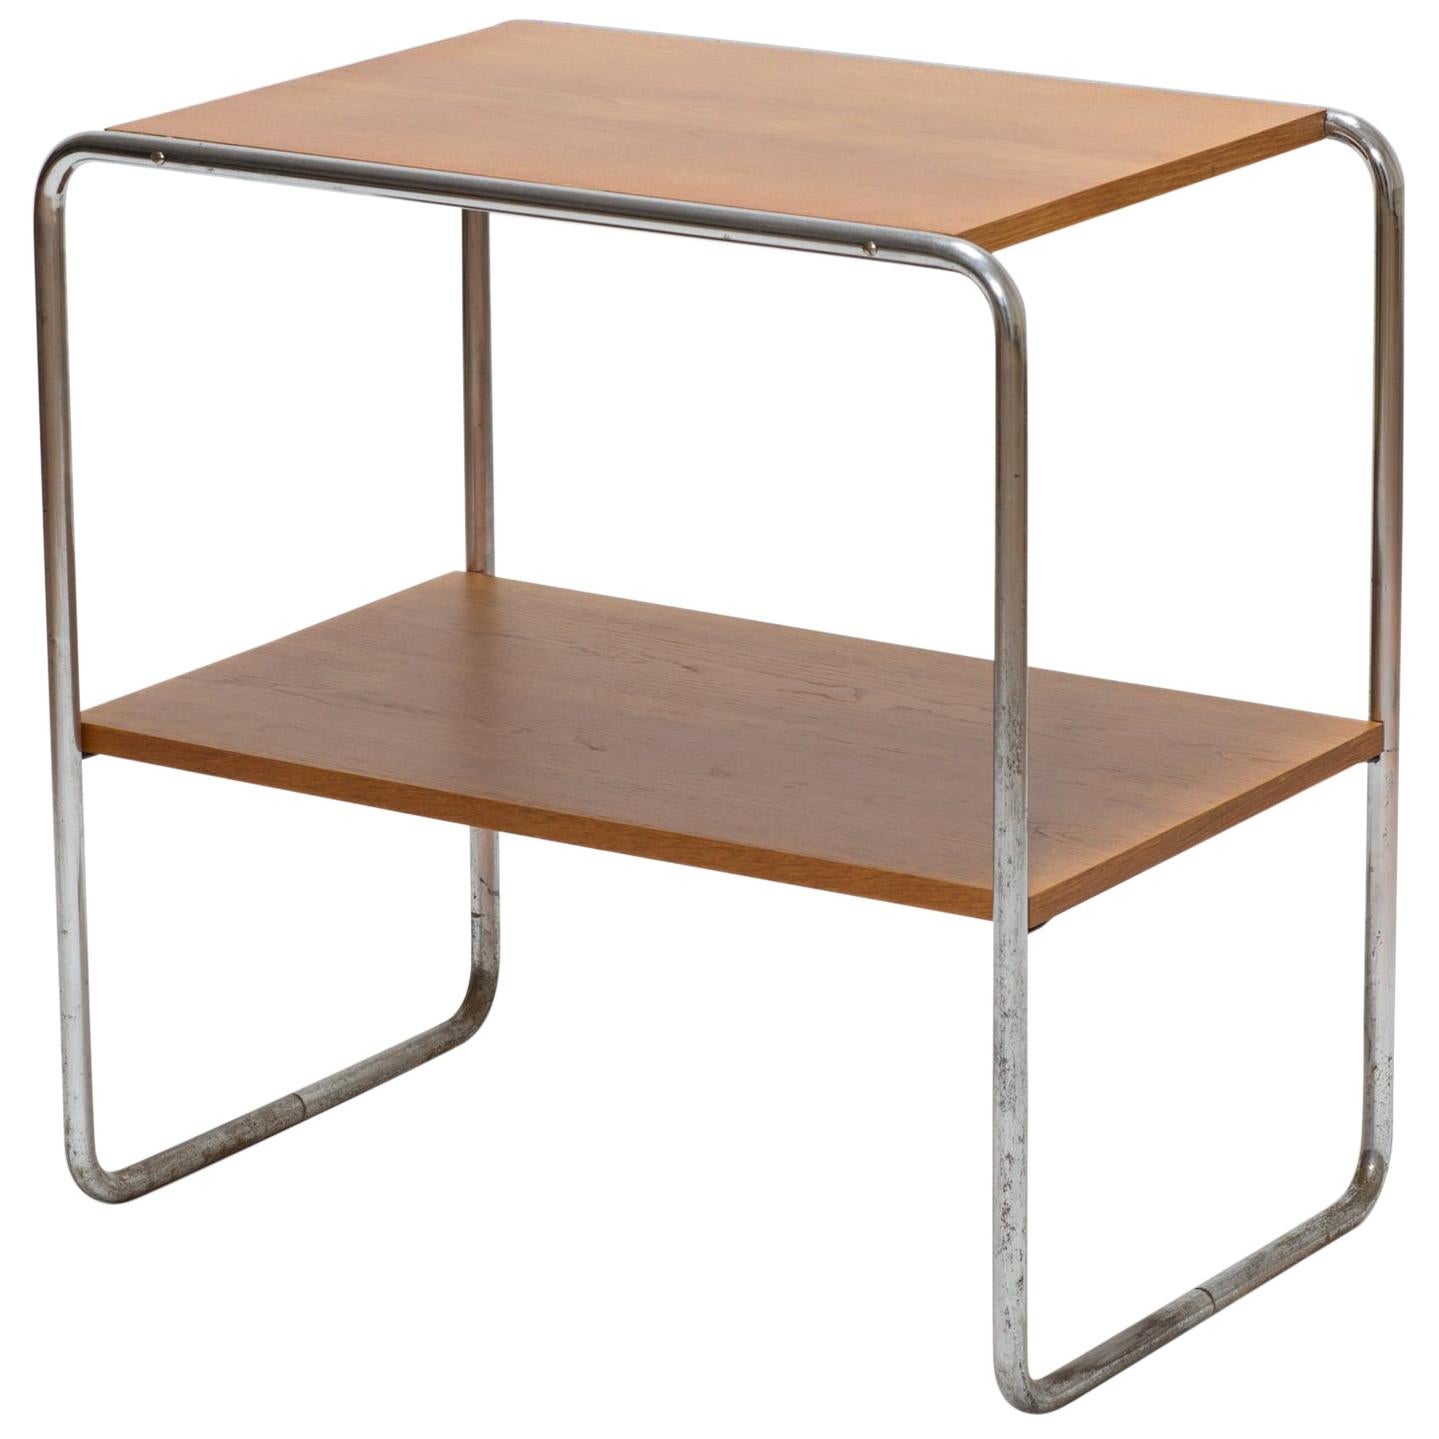 Midcentury Thonet Bauhaus Tubular Steel Coffee Side Table by Marcel Breuer, 1930 For Sale